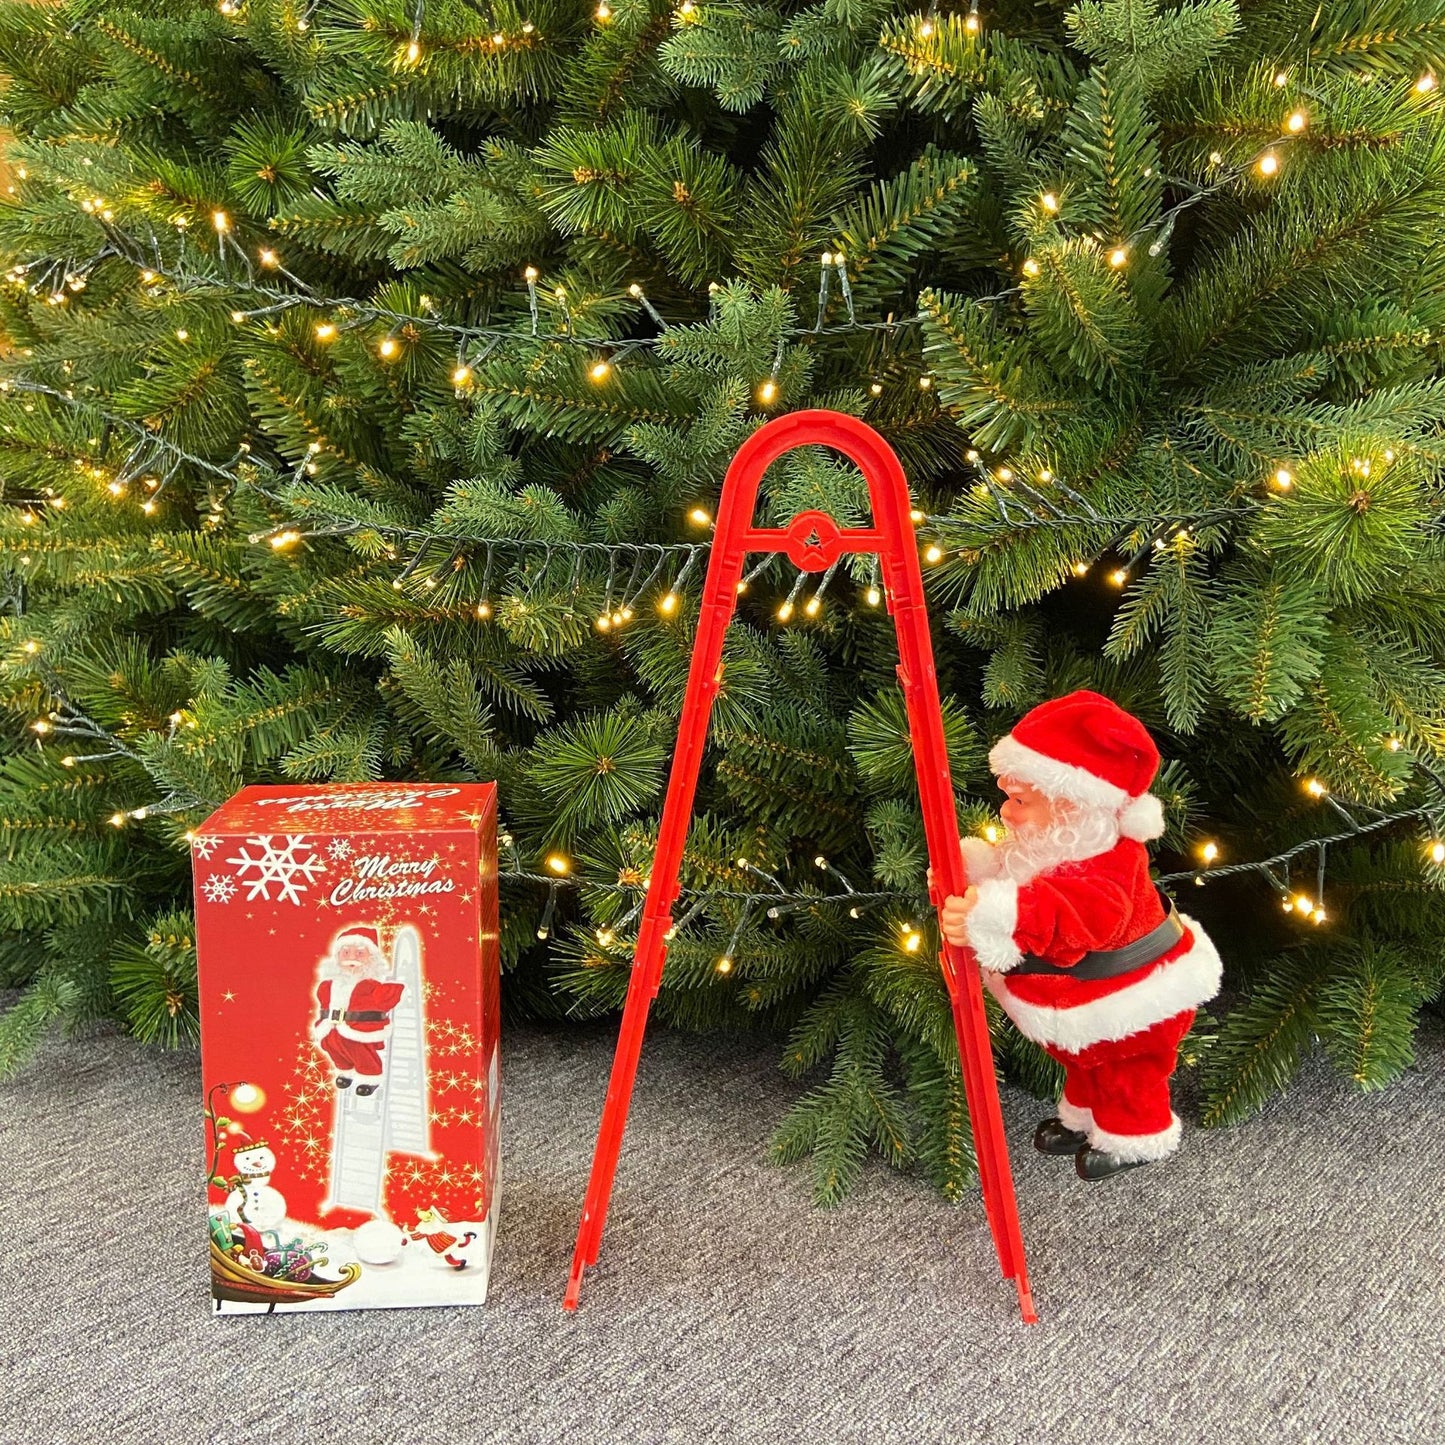 Electric toys, Christmas gifts, Christmas decorations, electric ladder, Santa Claus Christmas doll, flannelette doll